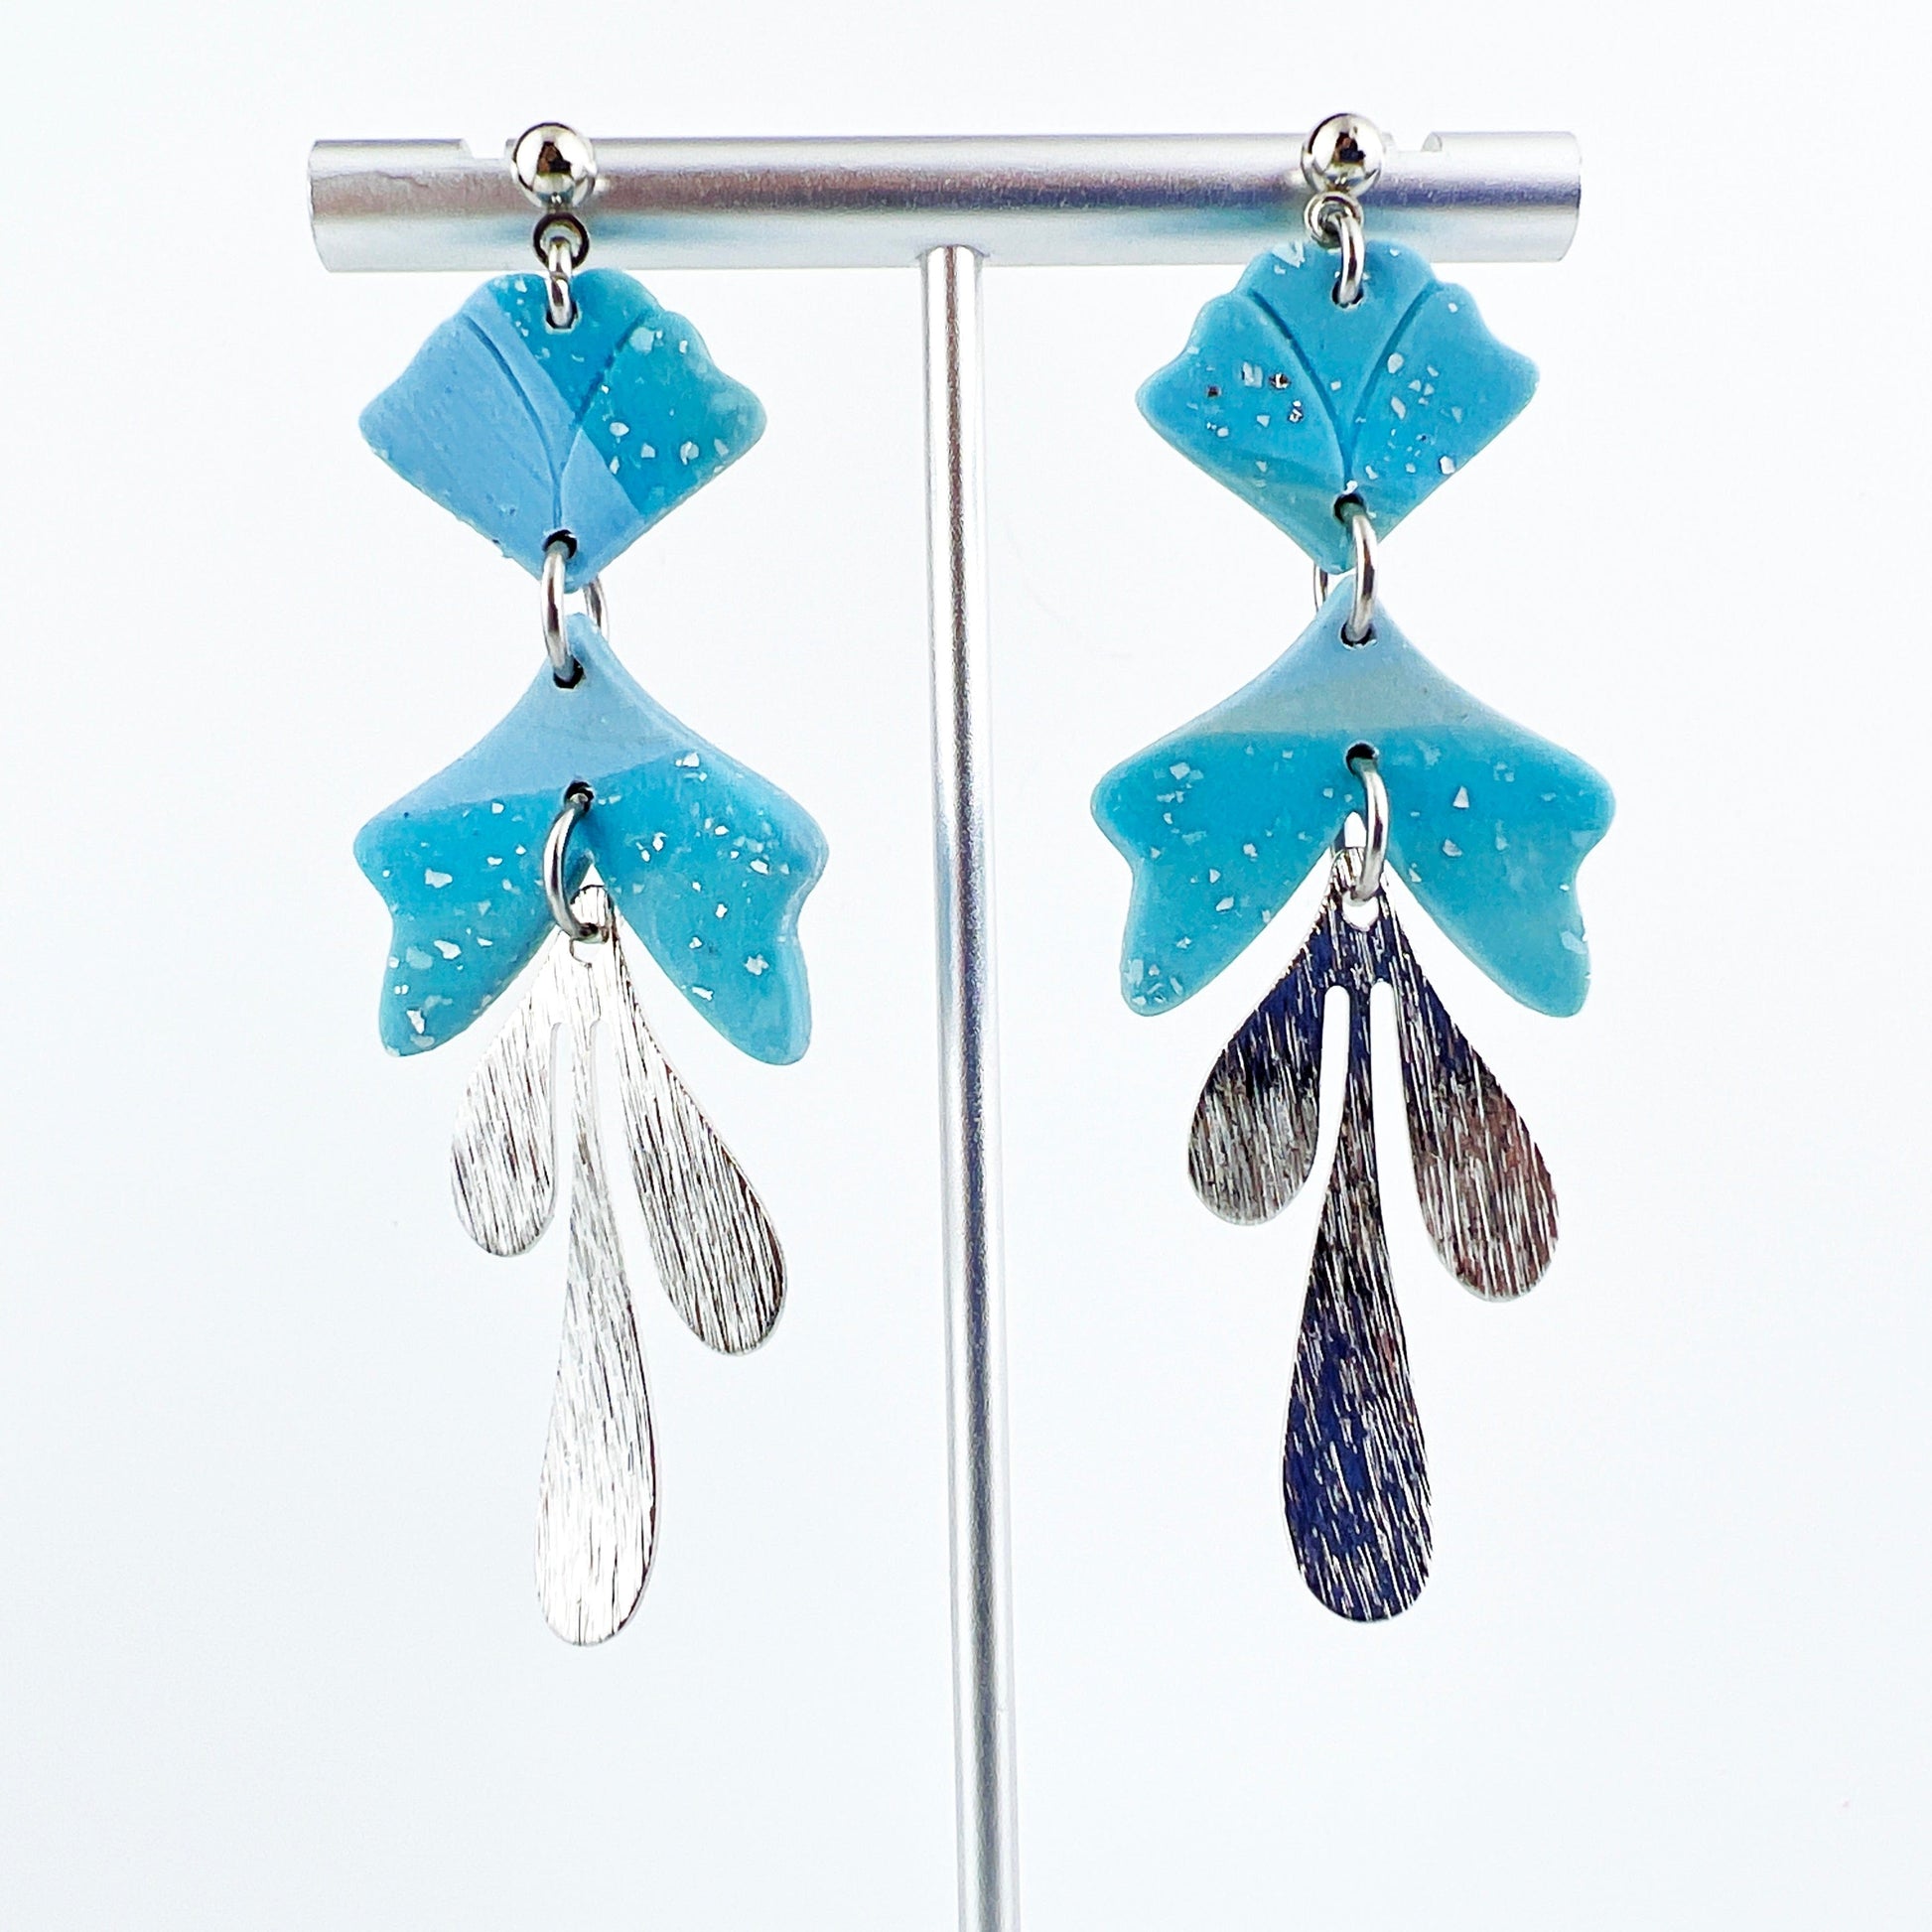 Earrings Inanna - Blue & Silver Floral Inspired Earrings